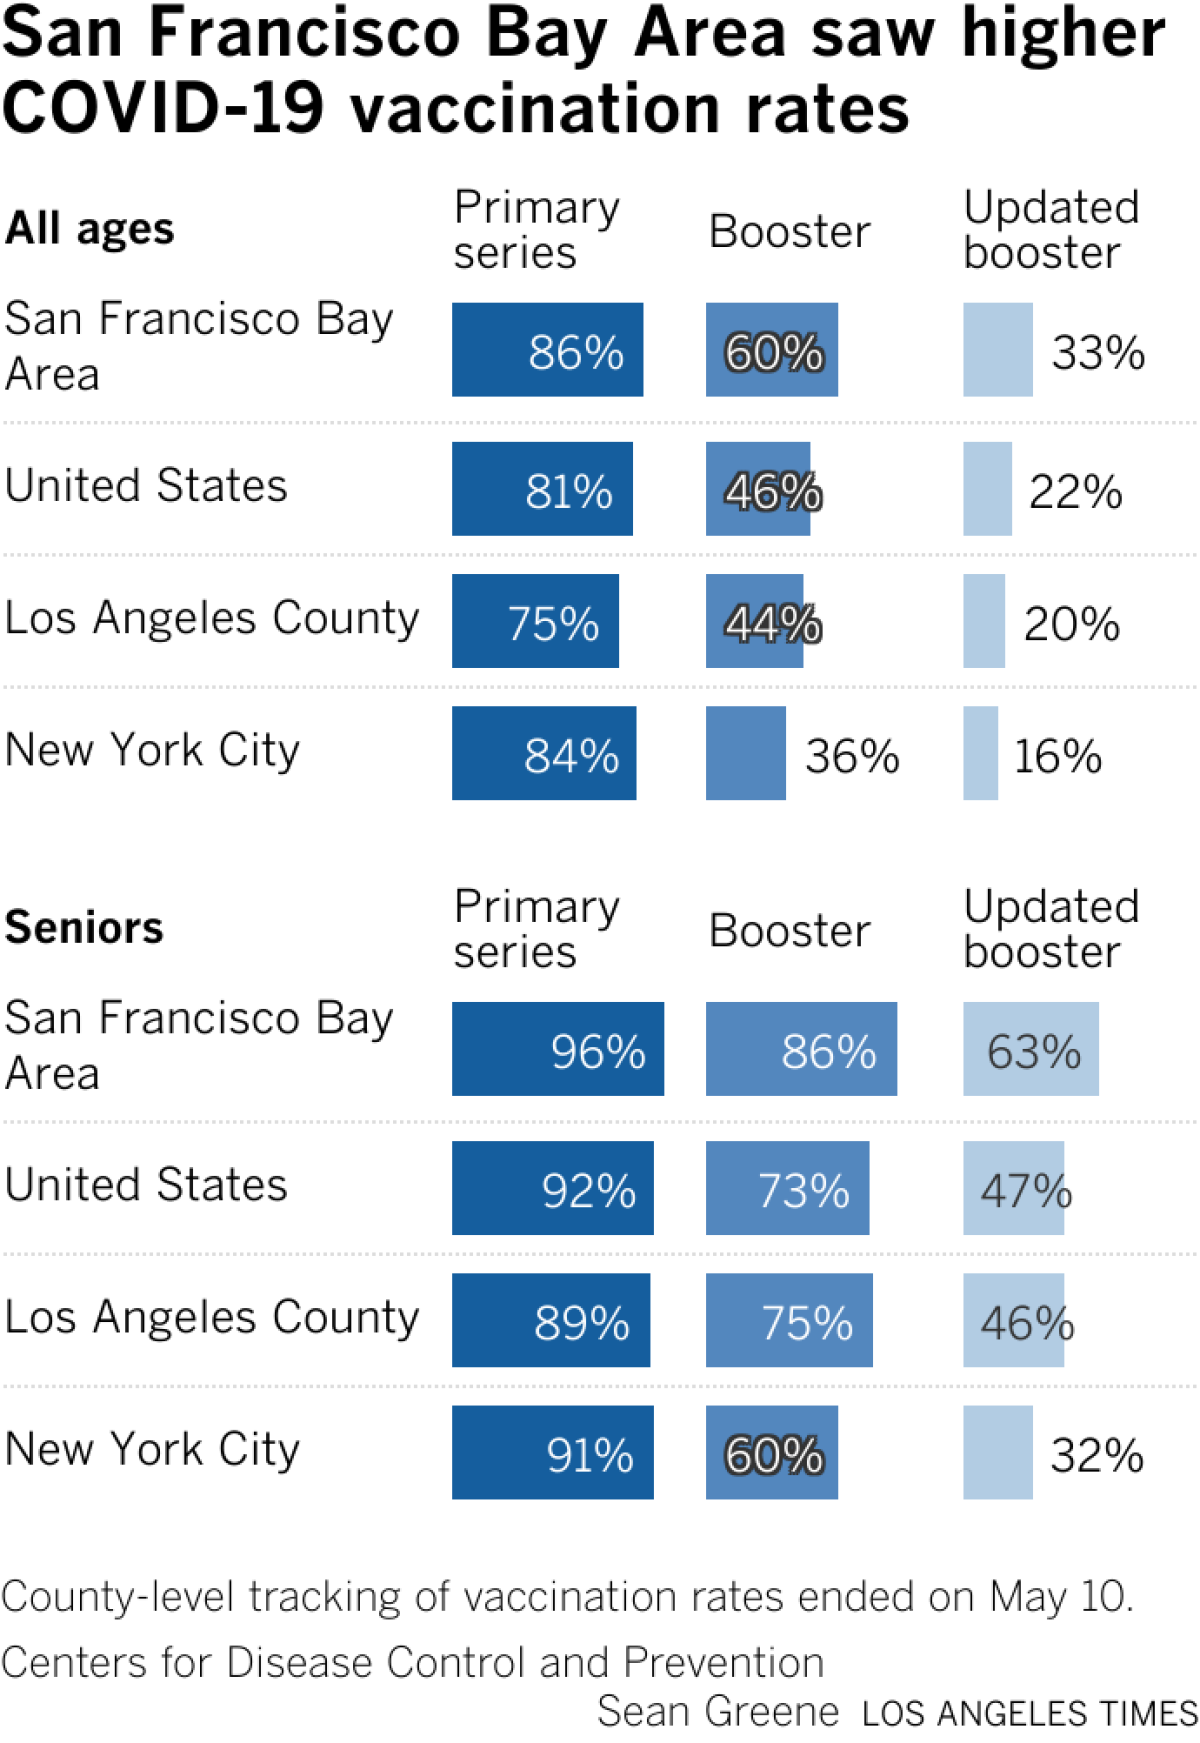 Series of bar charts shows COVID vaccination and booster rates for all ages and seniors in the San Francisco Bay Area, Los Angeles County, New York City and the United States. The Bay Area leads the other areas in all categories.